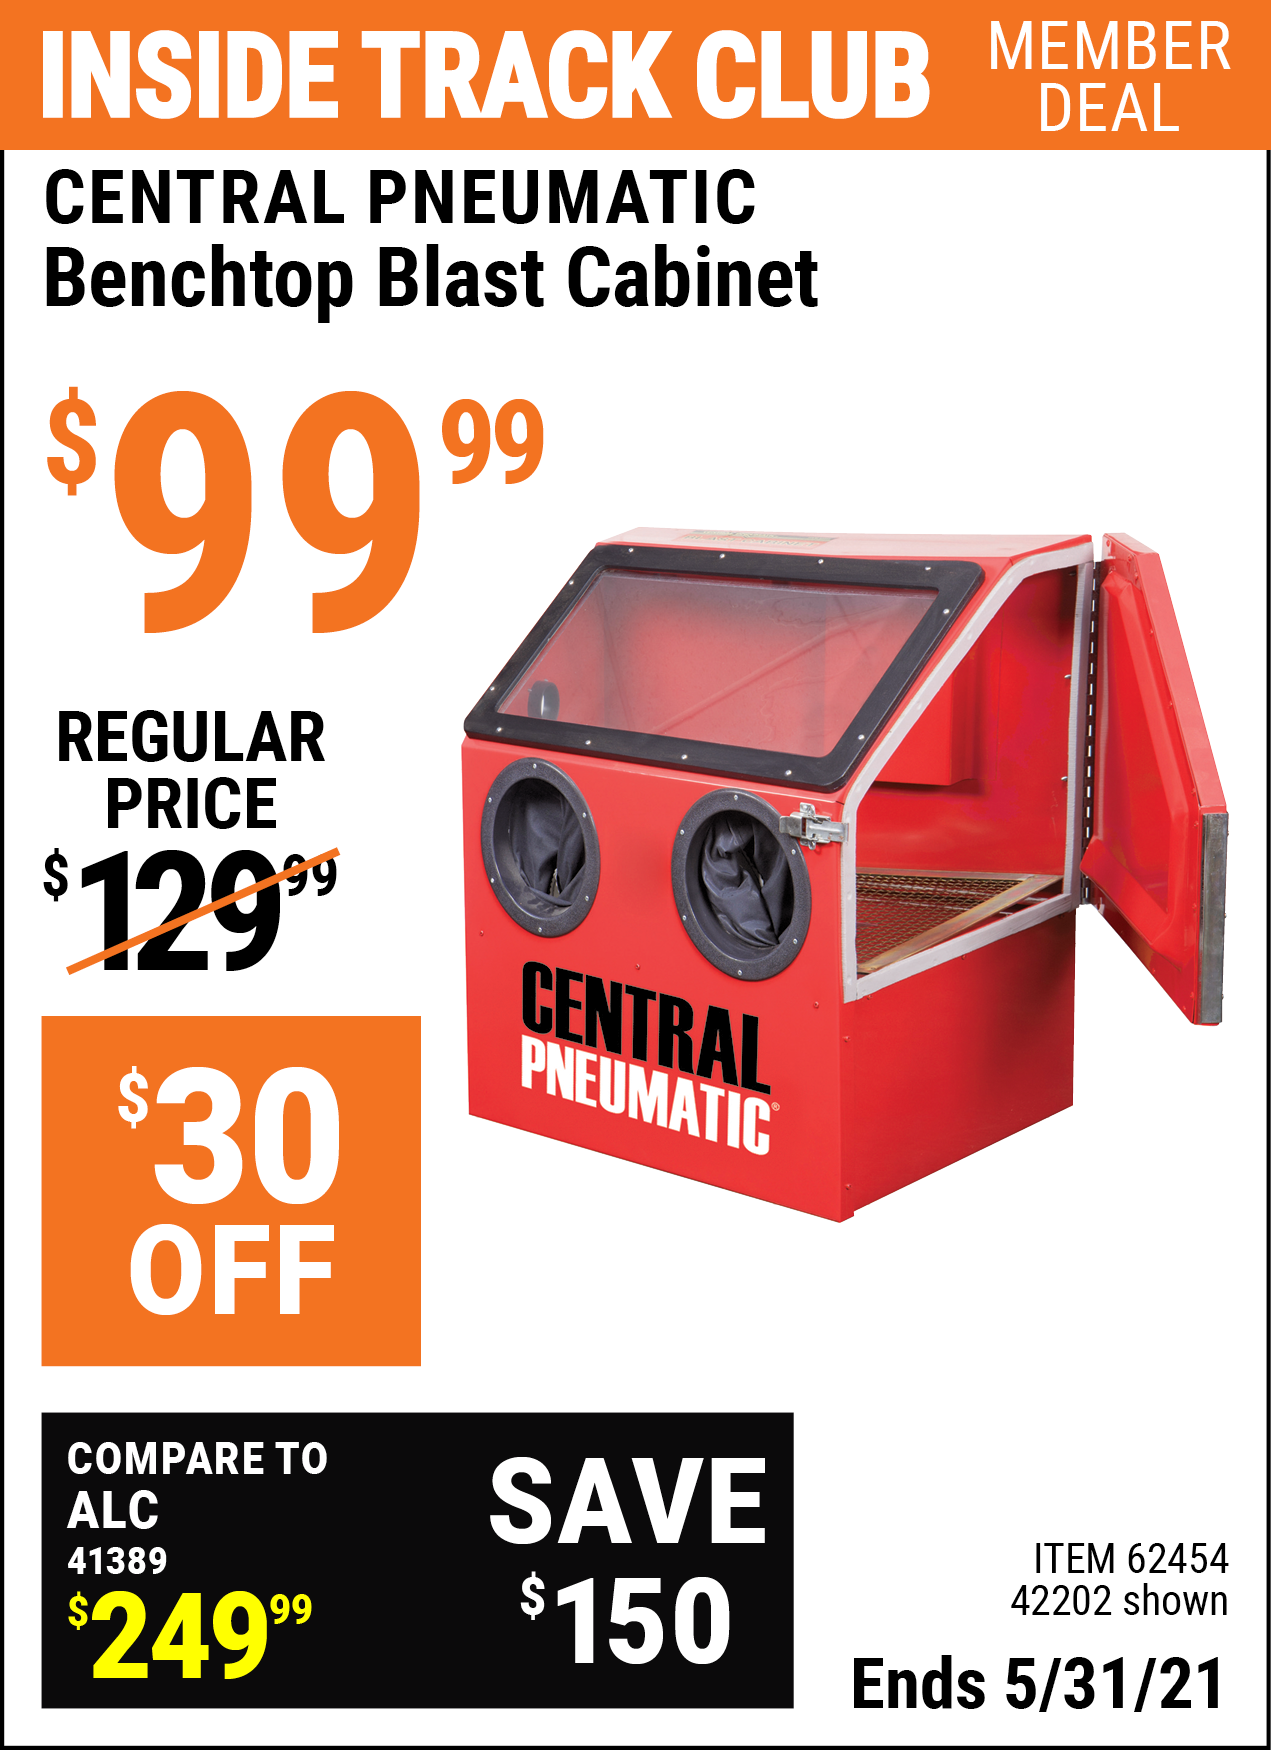 Inside Track Club members can buy the CENTRAL PNEUMATIC Benchtop Blast Cabinet (Item 62454/42202) for $99.99, valid through 5/31/2021.